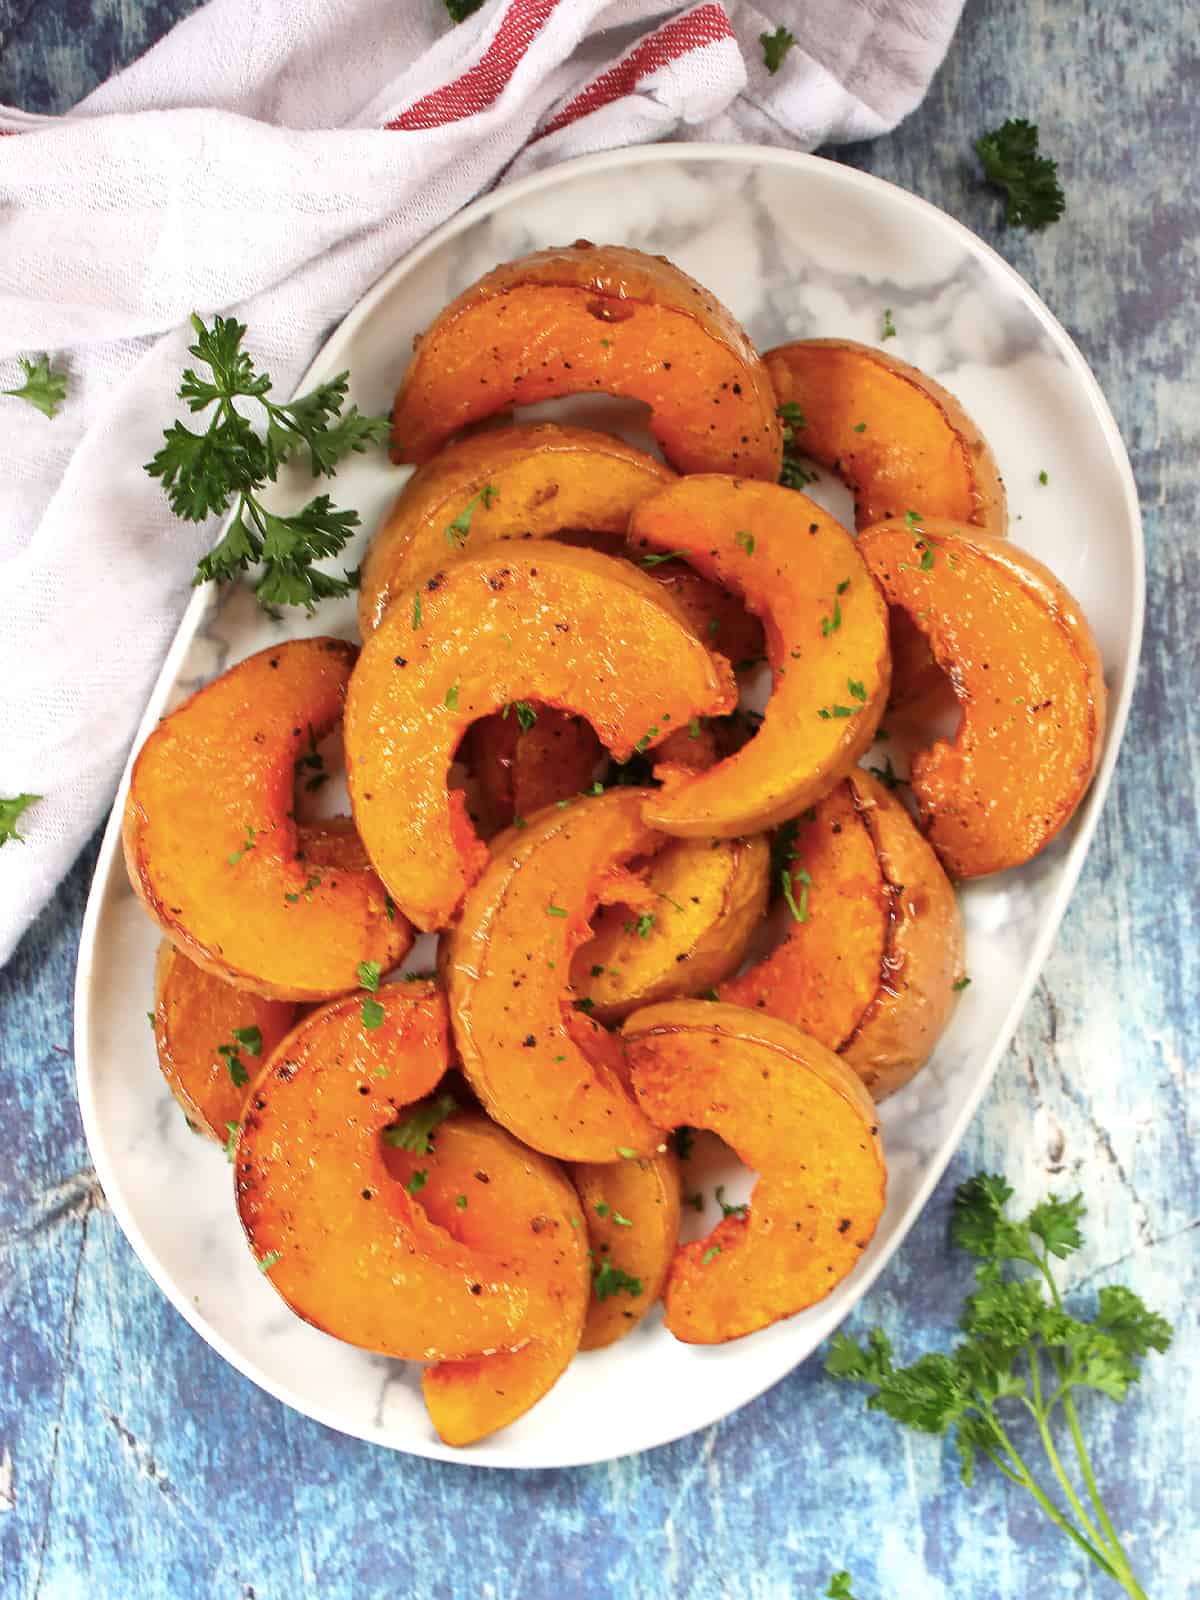 Roasted butterkin squash garnished with fresh parsley.